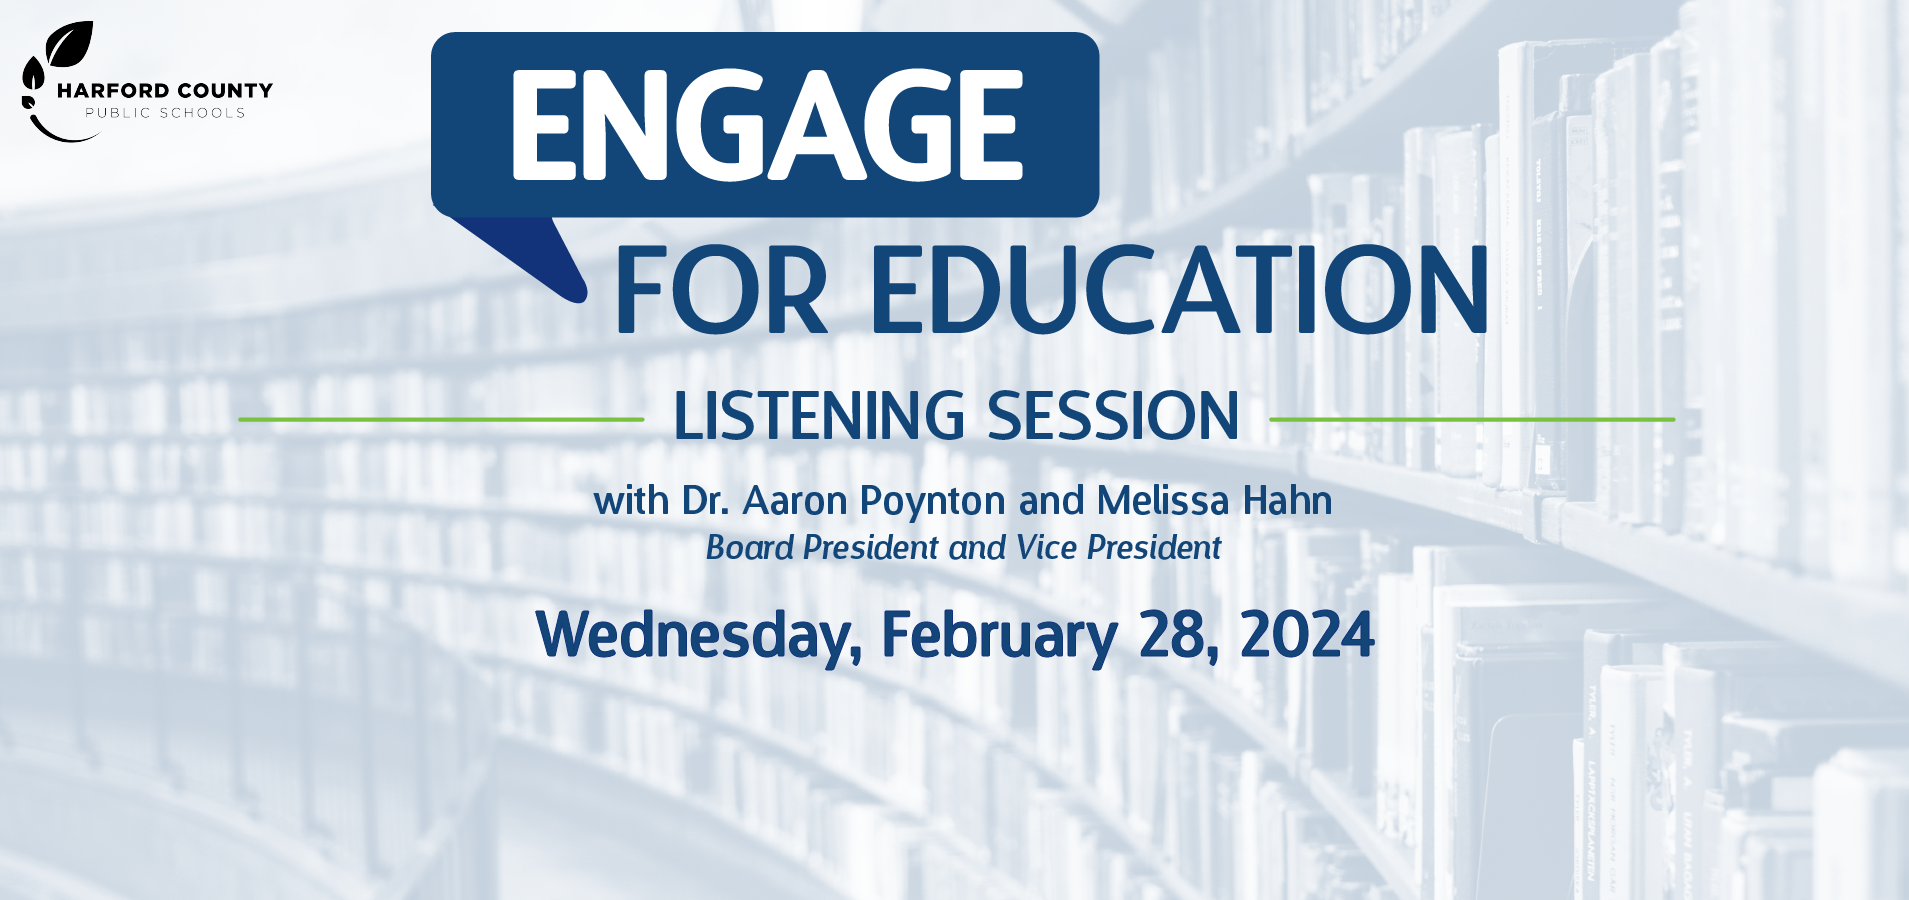 Engage for Education listening sessions with Dr. Aaron Poynton and Melissa Hahn